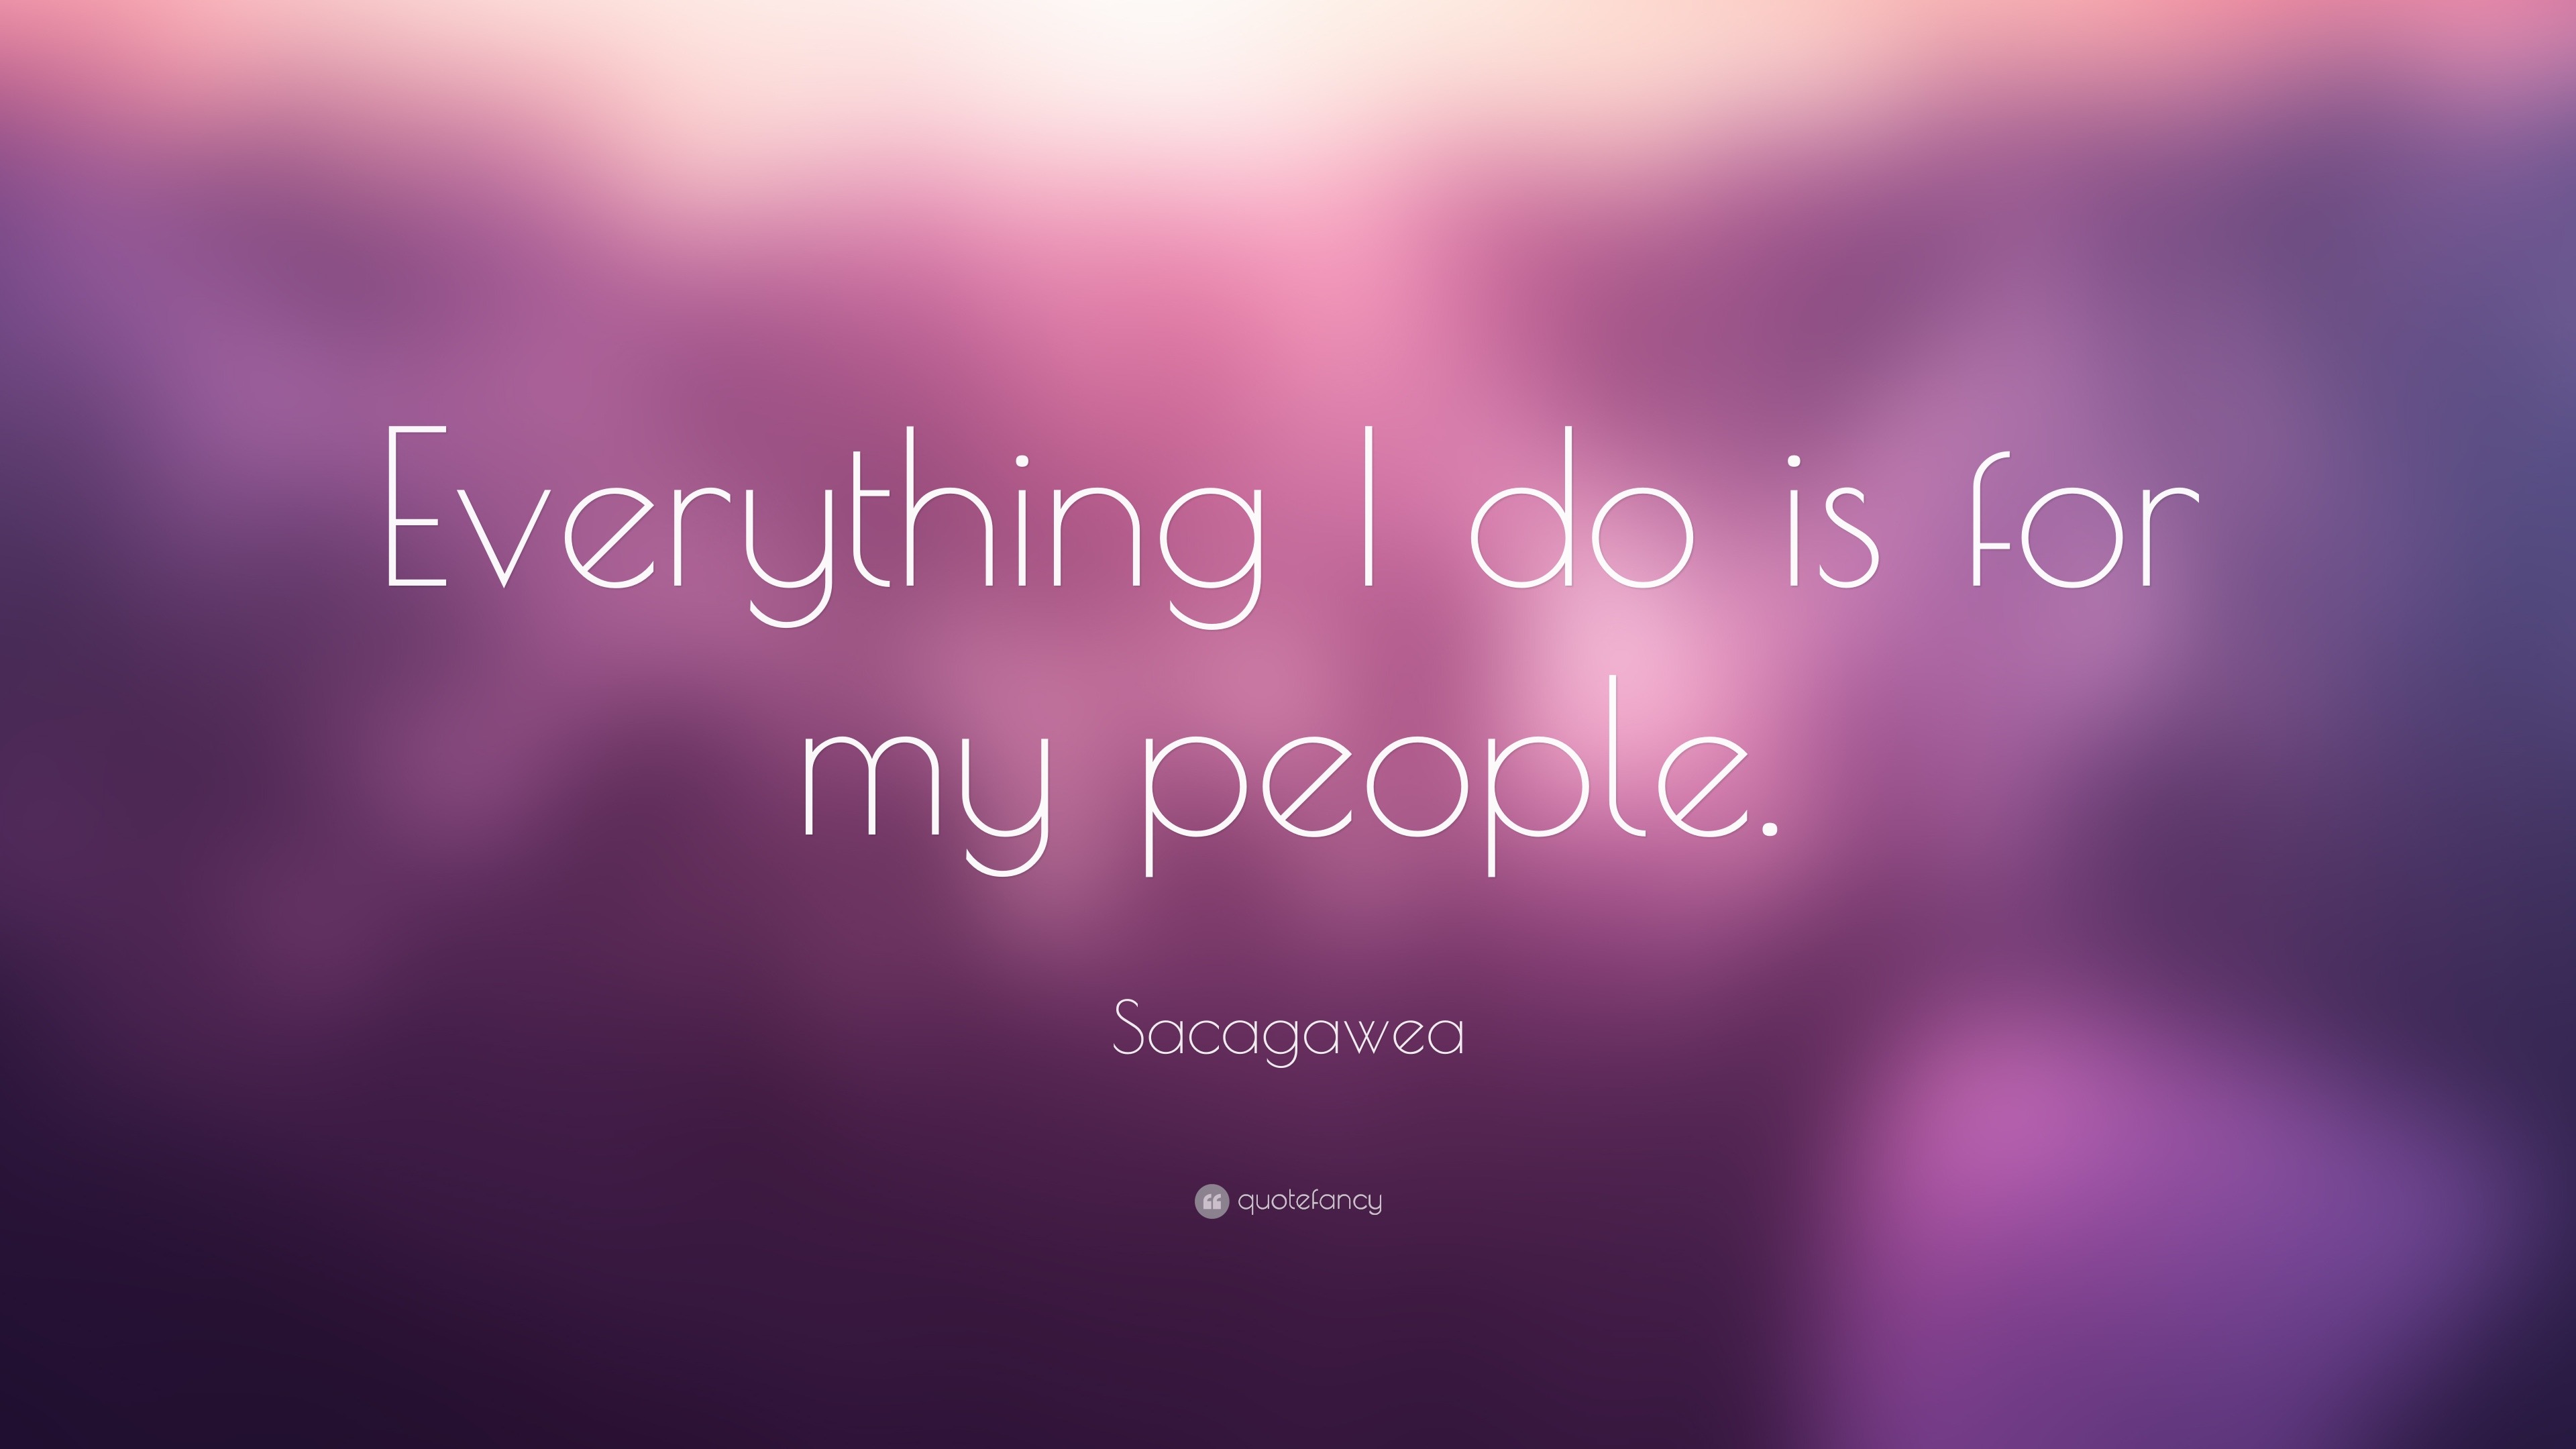 Sacagawea Quotes (3 wallpapers) - Quotefancy